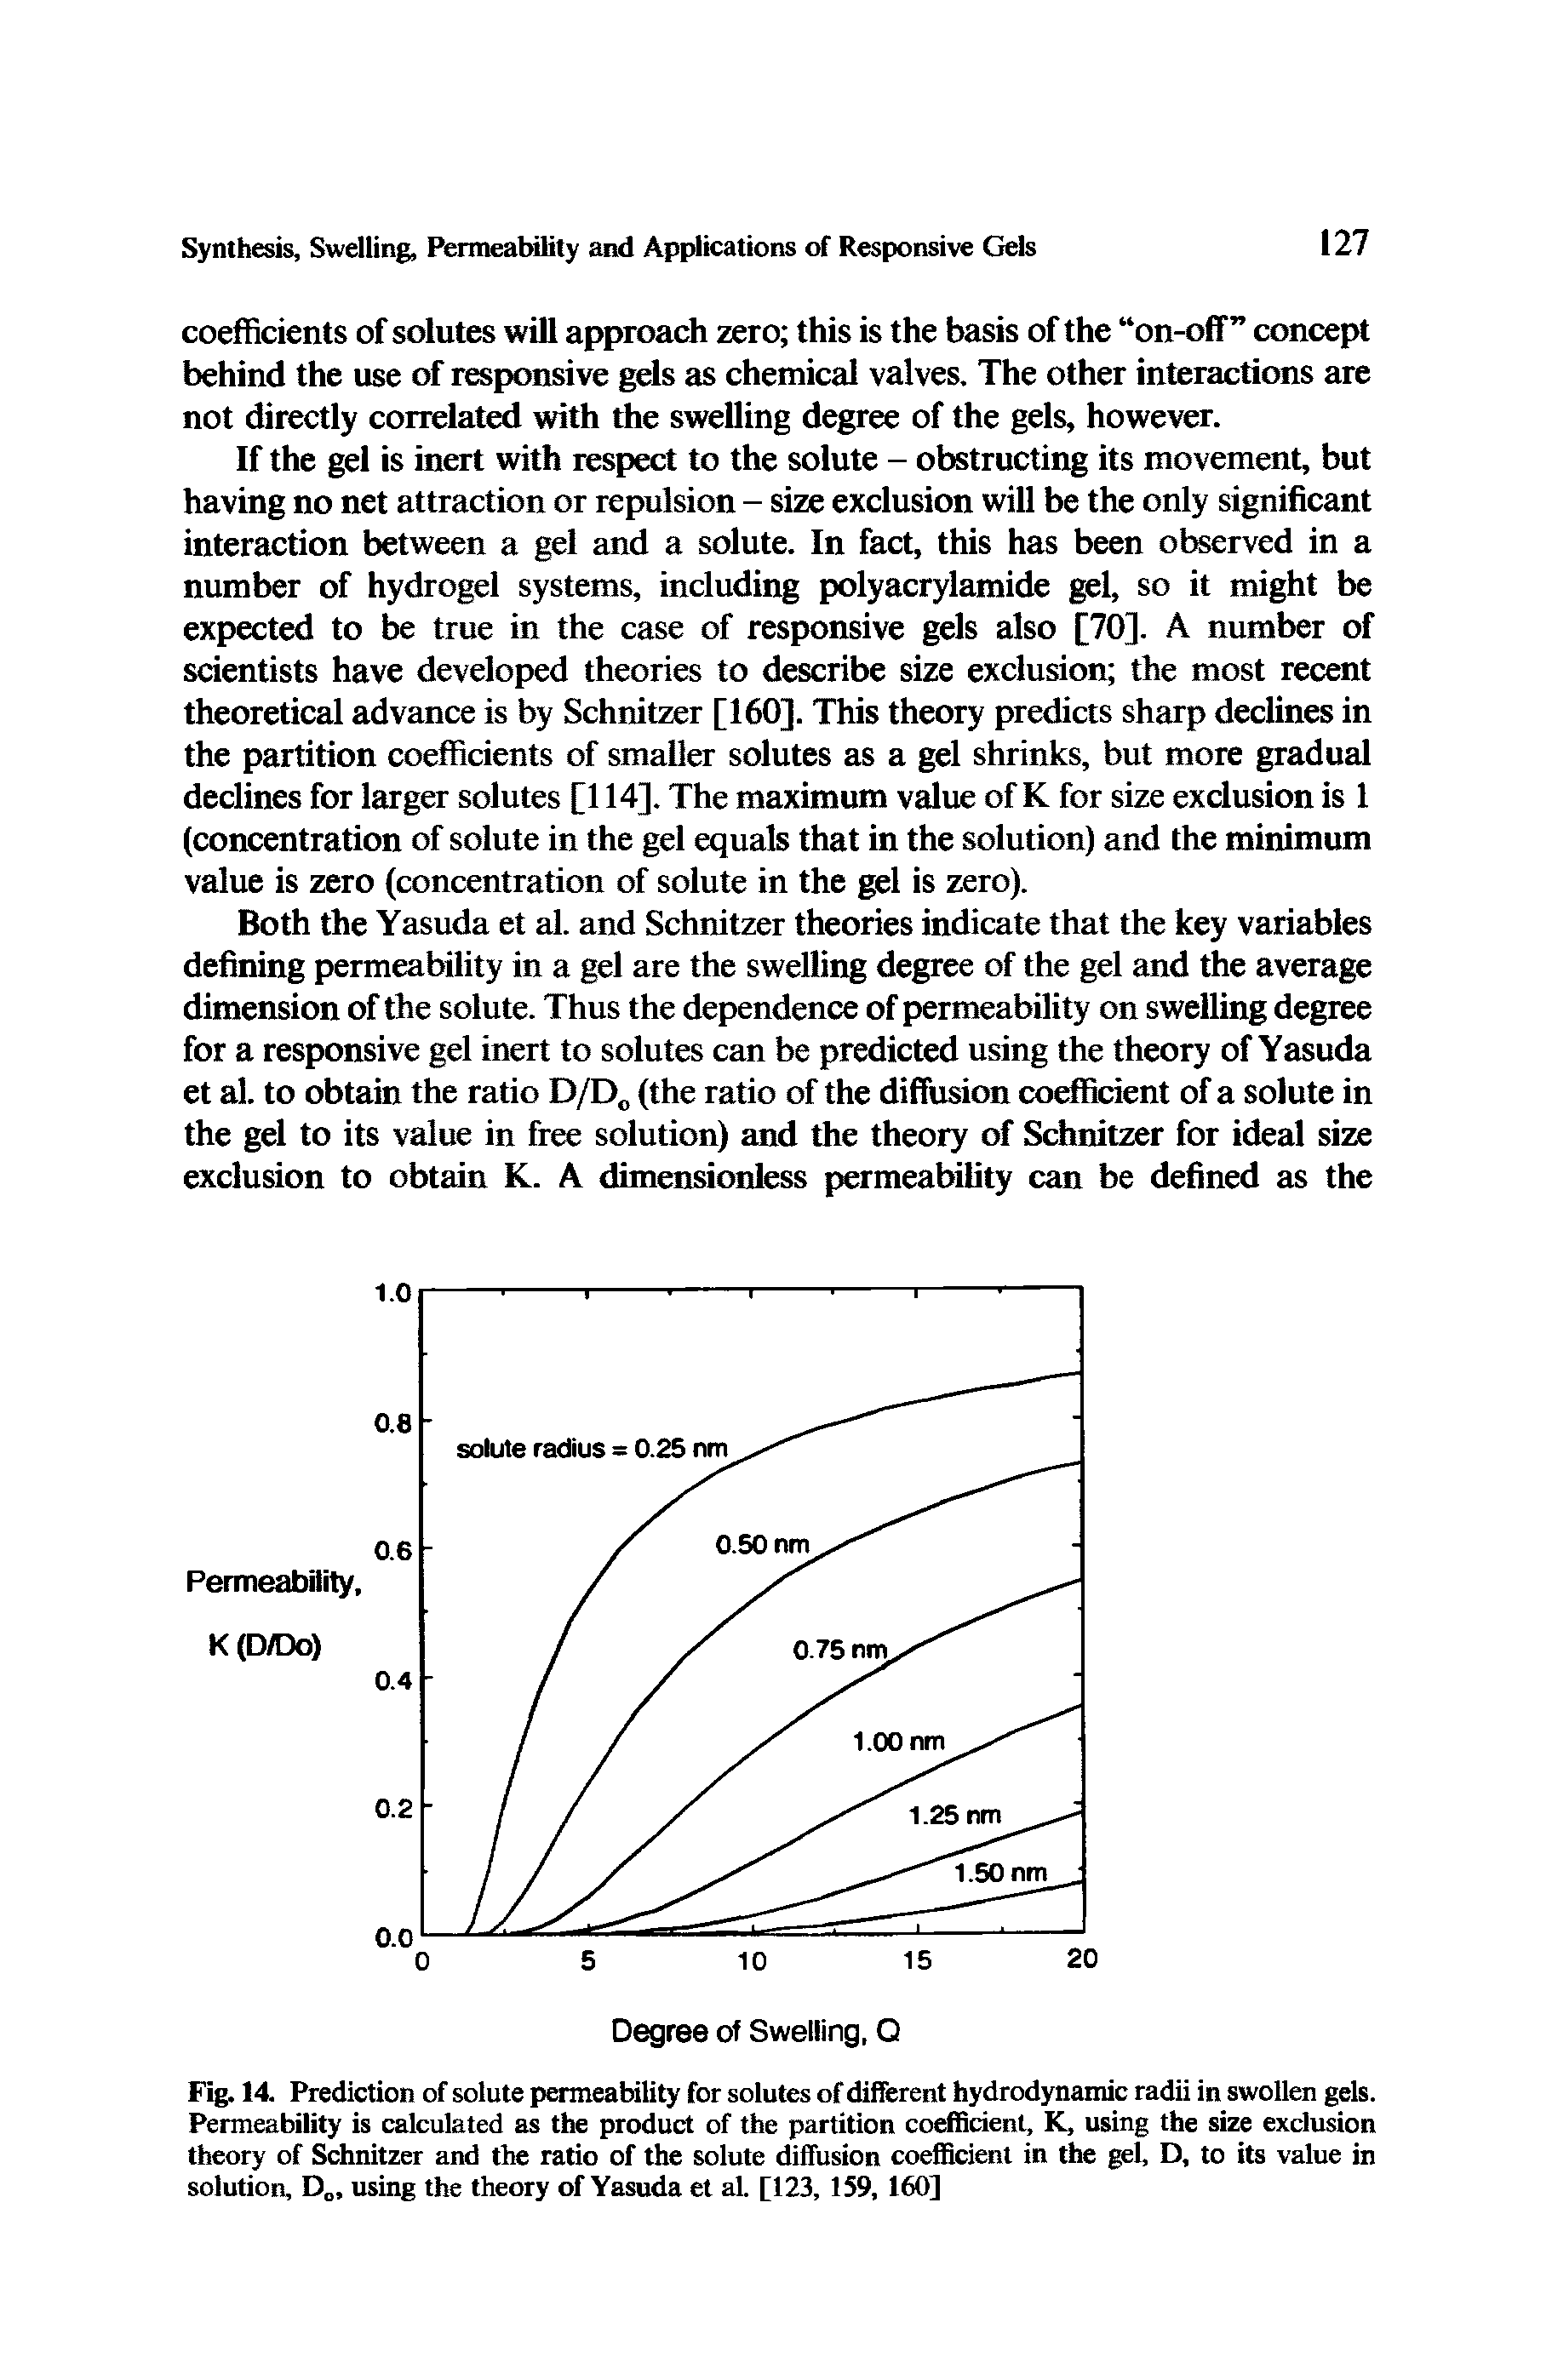 Fig. 14. Prediction of solute permeability for solutes of different hydrodynamic radii in swollen gels. Permeability is calculated as the product of the partition coefficient, K, using the size exclusion theory of Schnitzer and the ratio of the solute diffusion coefficient in the gel, D, to its value in solution, D , using the theory of Yasuda et al. [123, 159, 160]...